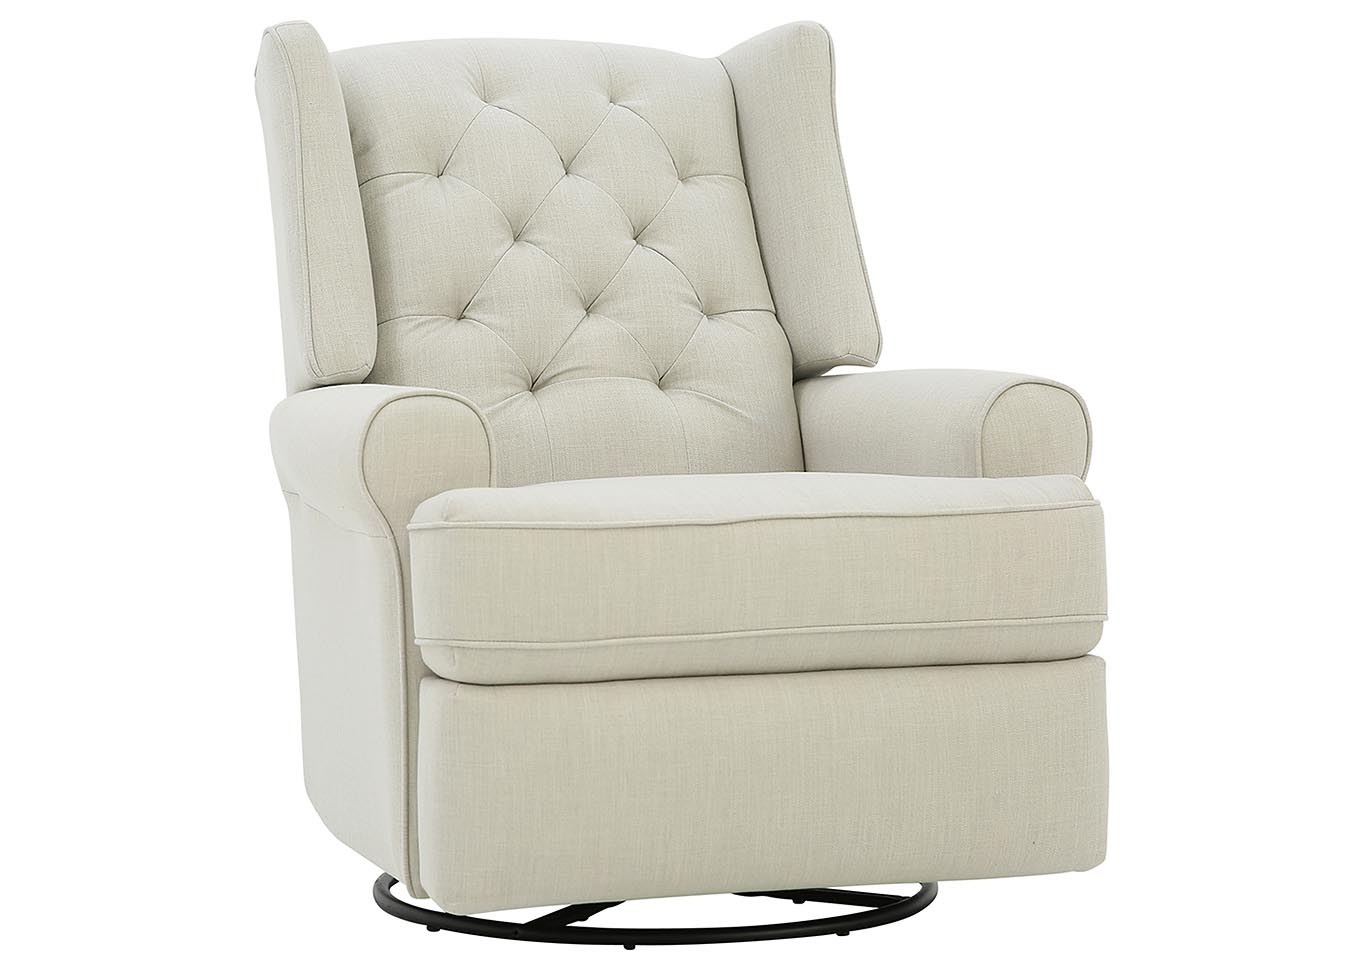 Best Chairs Inc Swivel Glider Recliner | Swivel Chairs